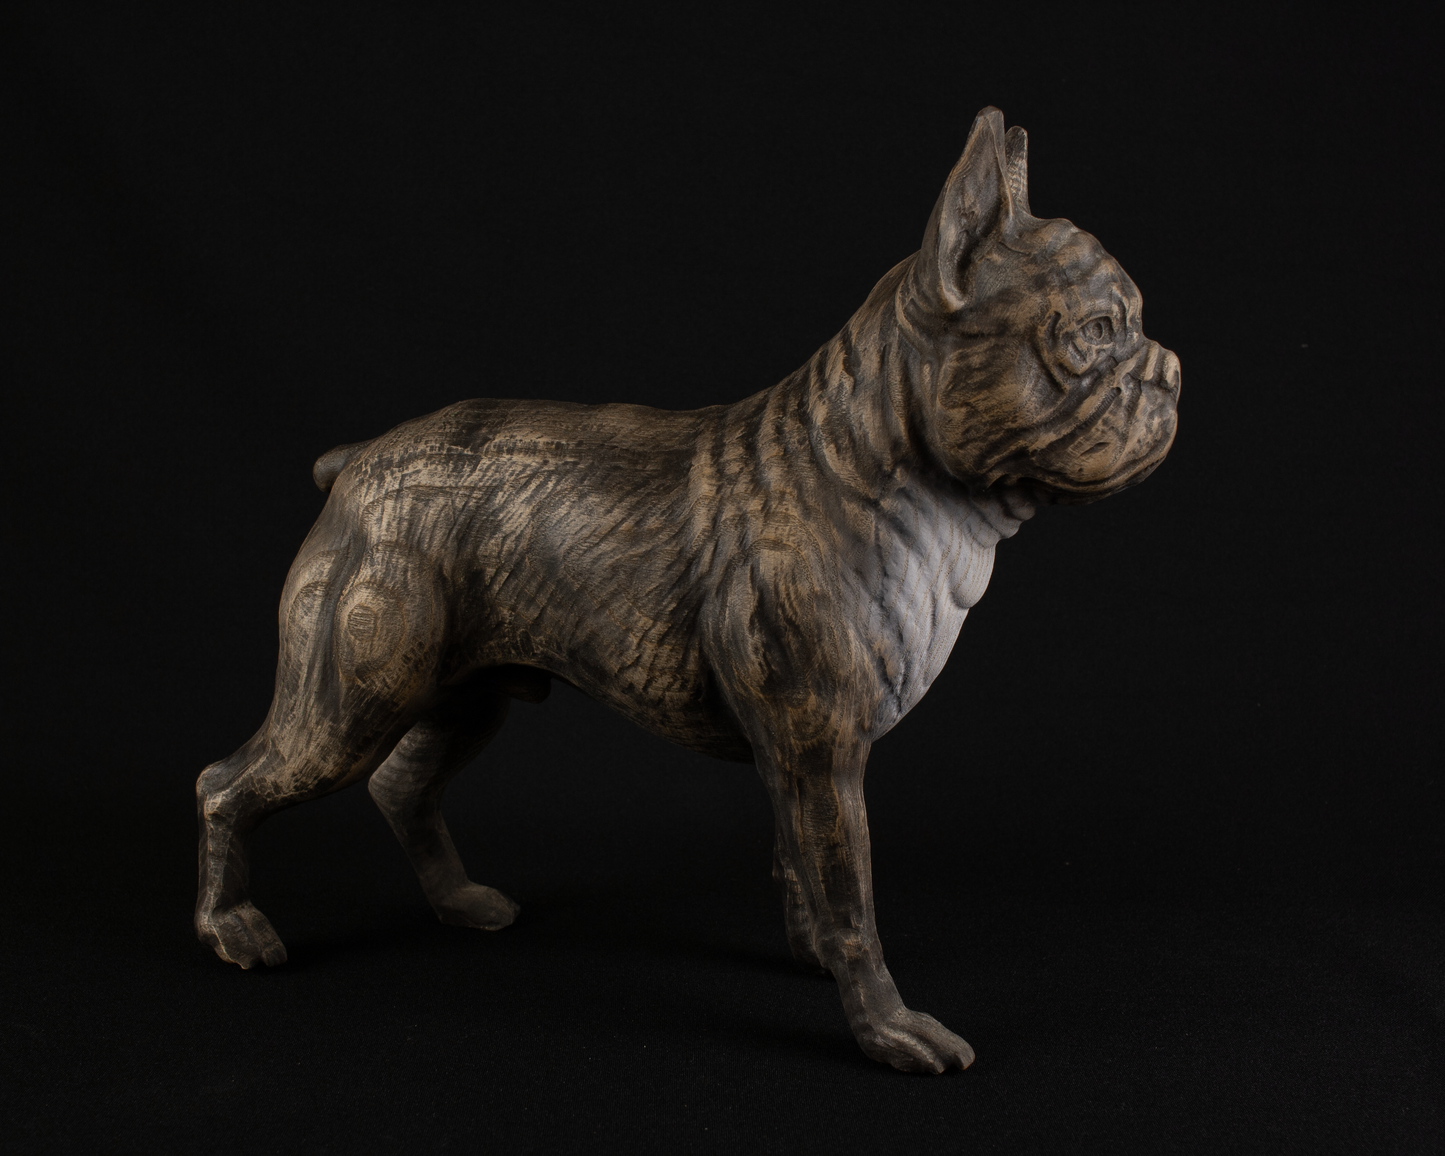 Bulldog's Ashen Guardian: A Wooden Figurine Inspired by French Bulldogs